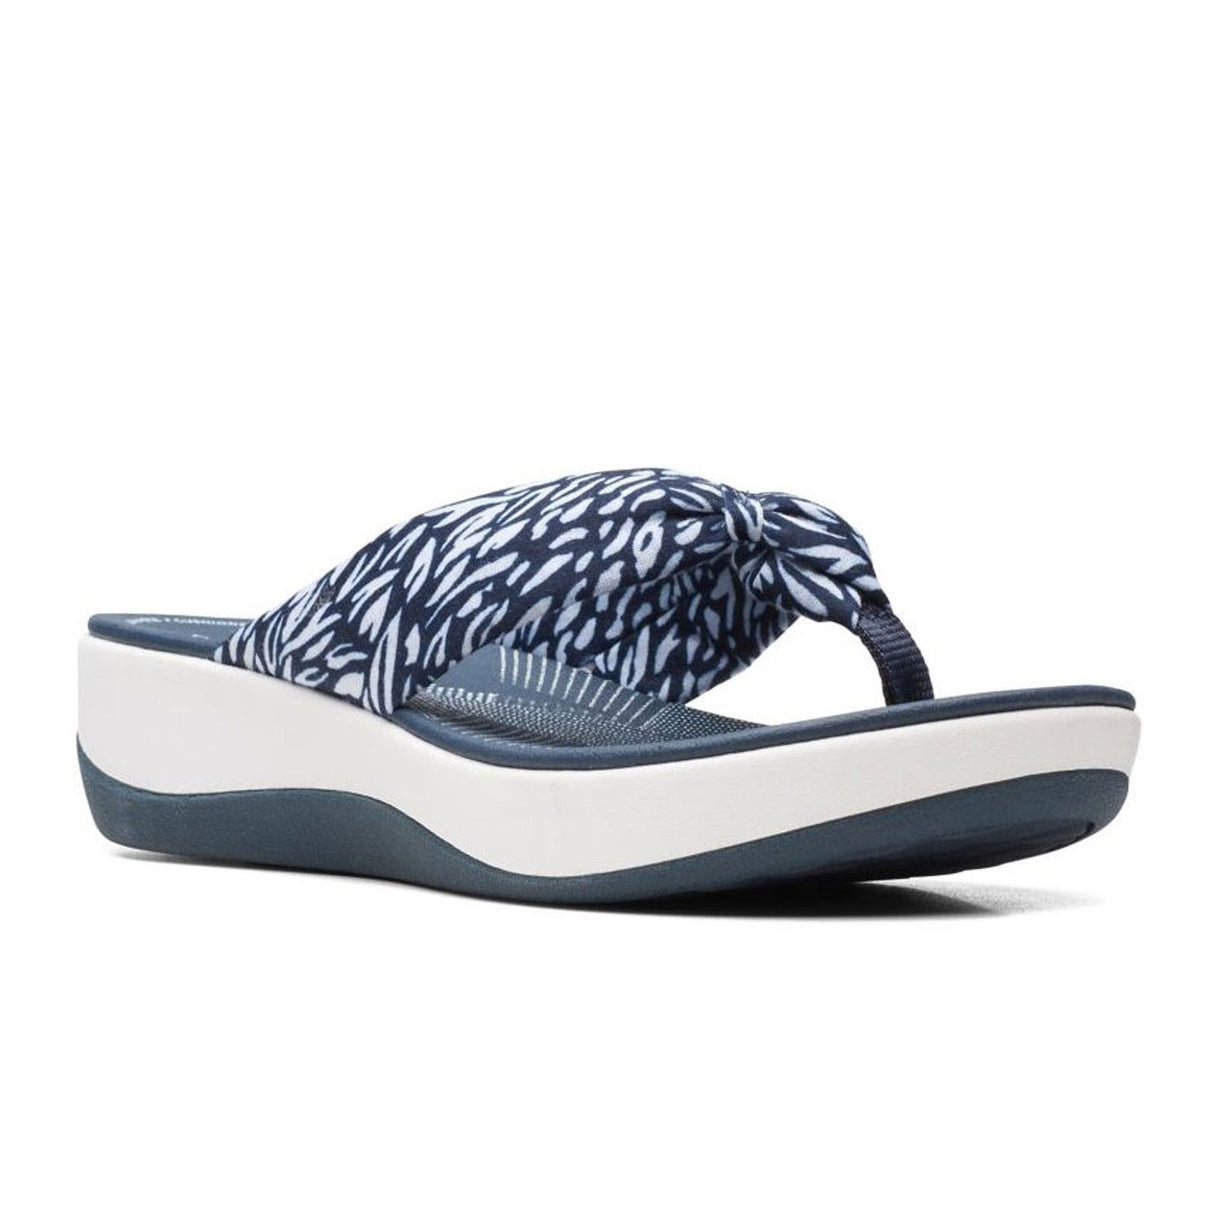 Clarks Arla Glison Thong Sandal (Women) - Navy Abstract Sandals - Thong - The Heel Shoe Fitters